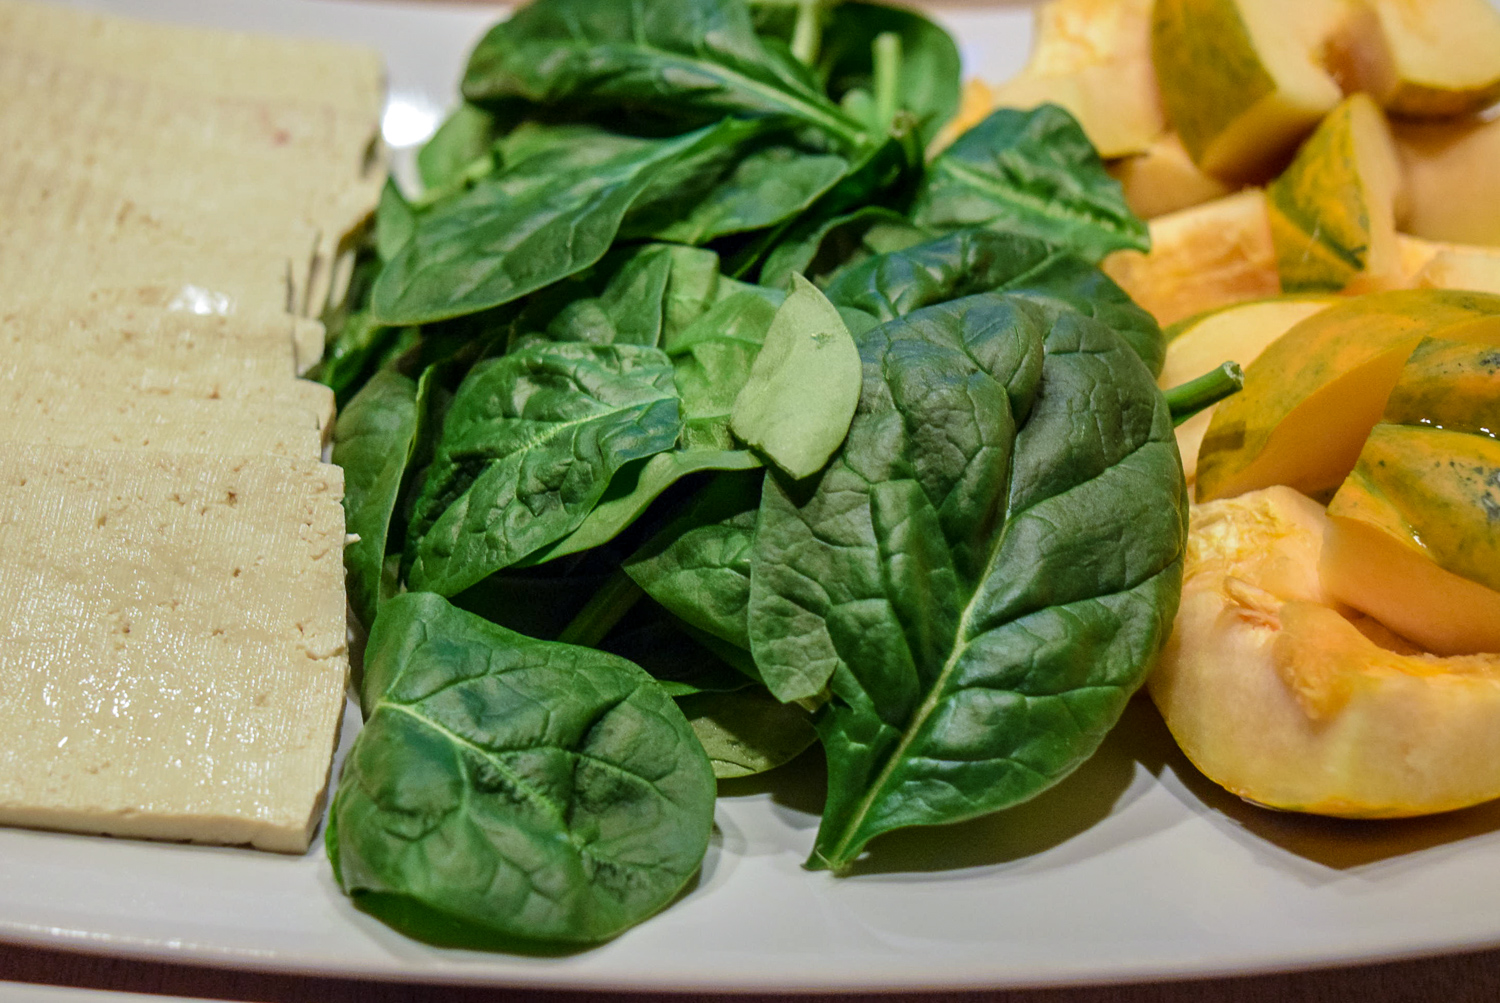 Tofu, spinach, and acorn squash on plate for Instant Pot Hot Pot up close